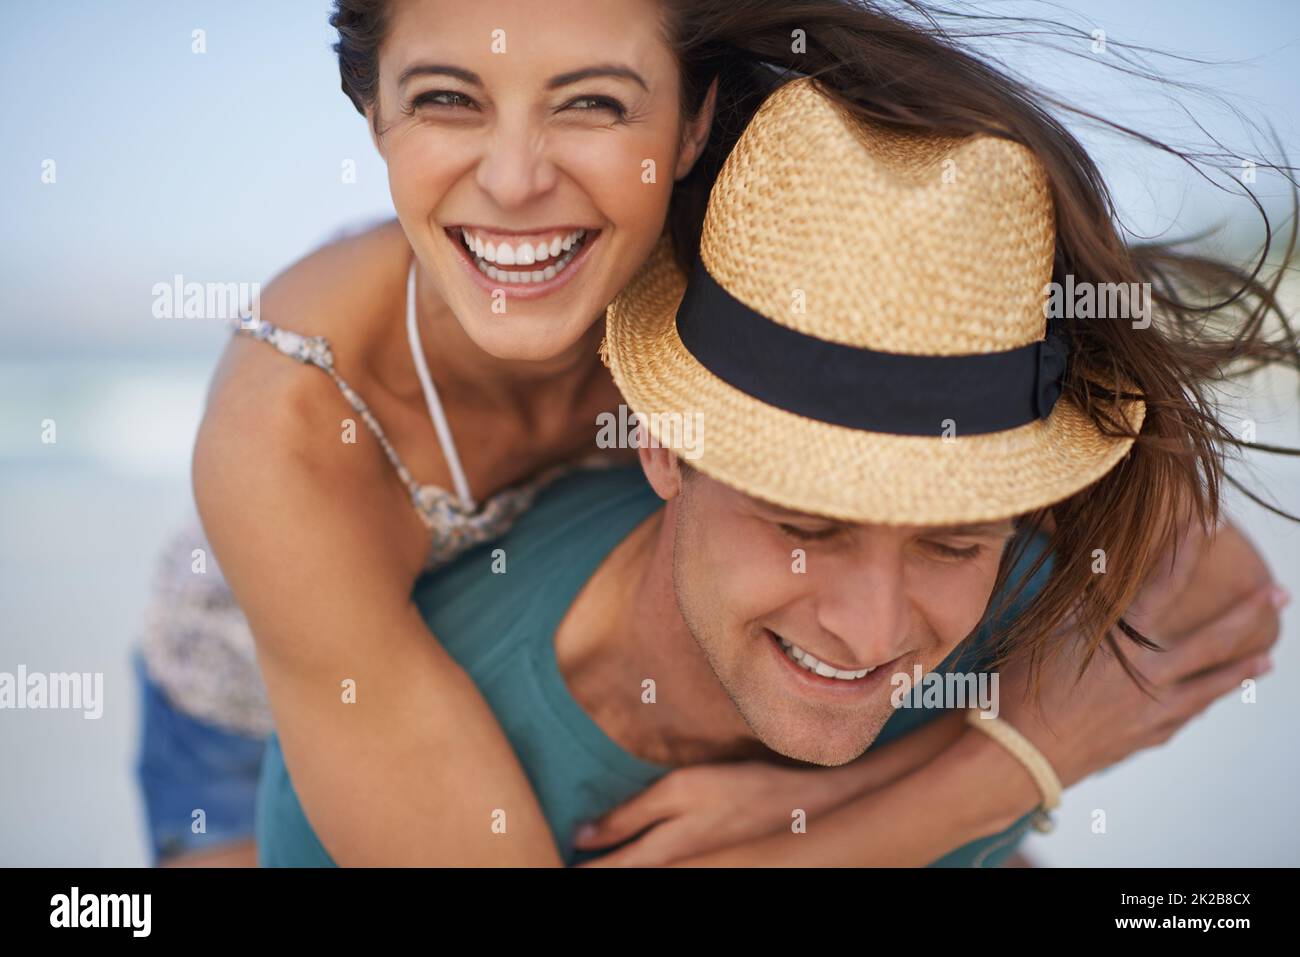 They always have fun together. A young couple piggybacking at the beach. Stock Photo